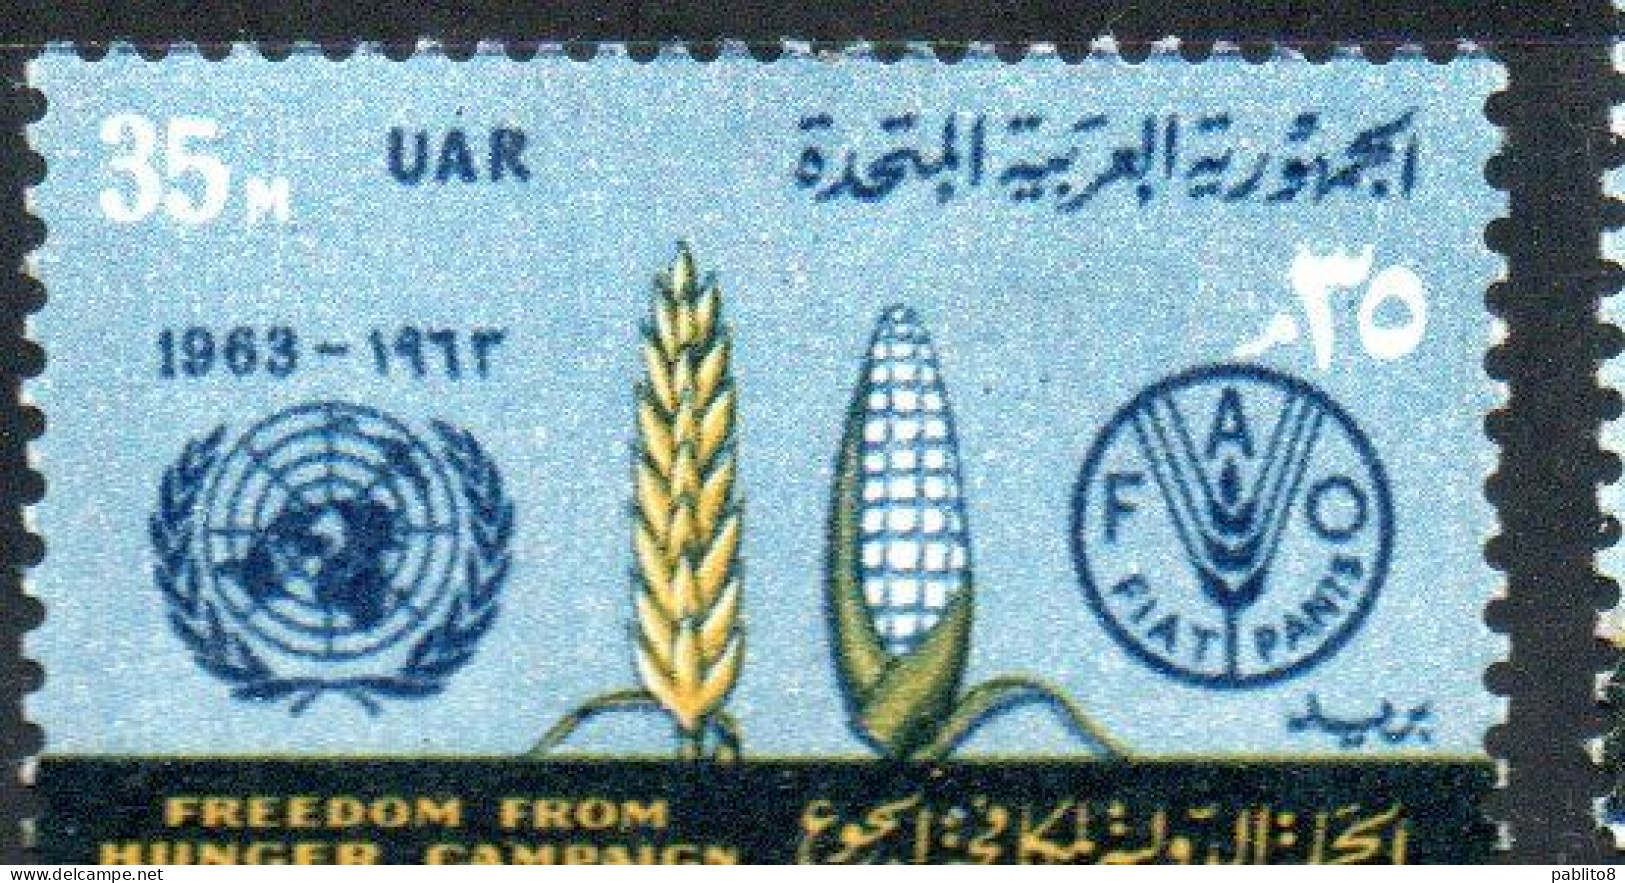 UAR EGYPT EGITTO 1963 FAO FREEDOM FROM HUNGER CAMPAIGN WHEAT CORN AND EMBLEMS 35m MH - Ongebruikt